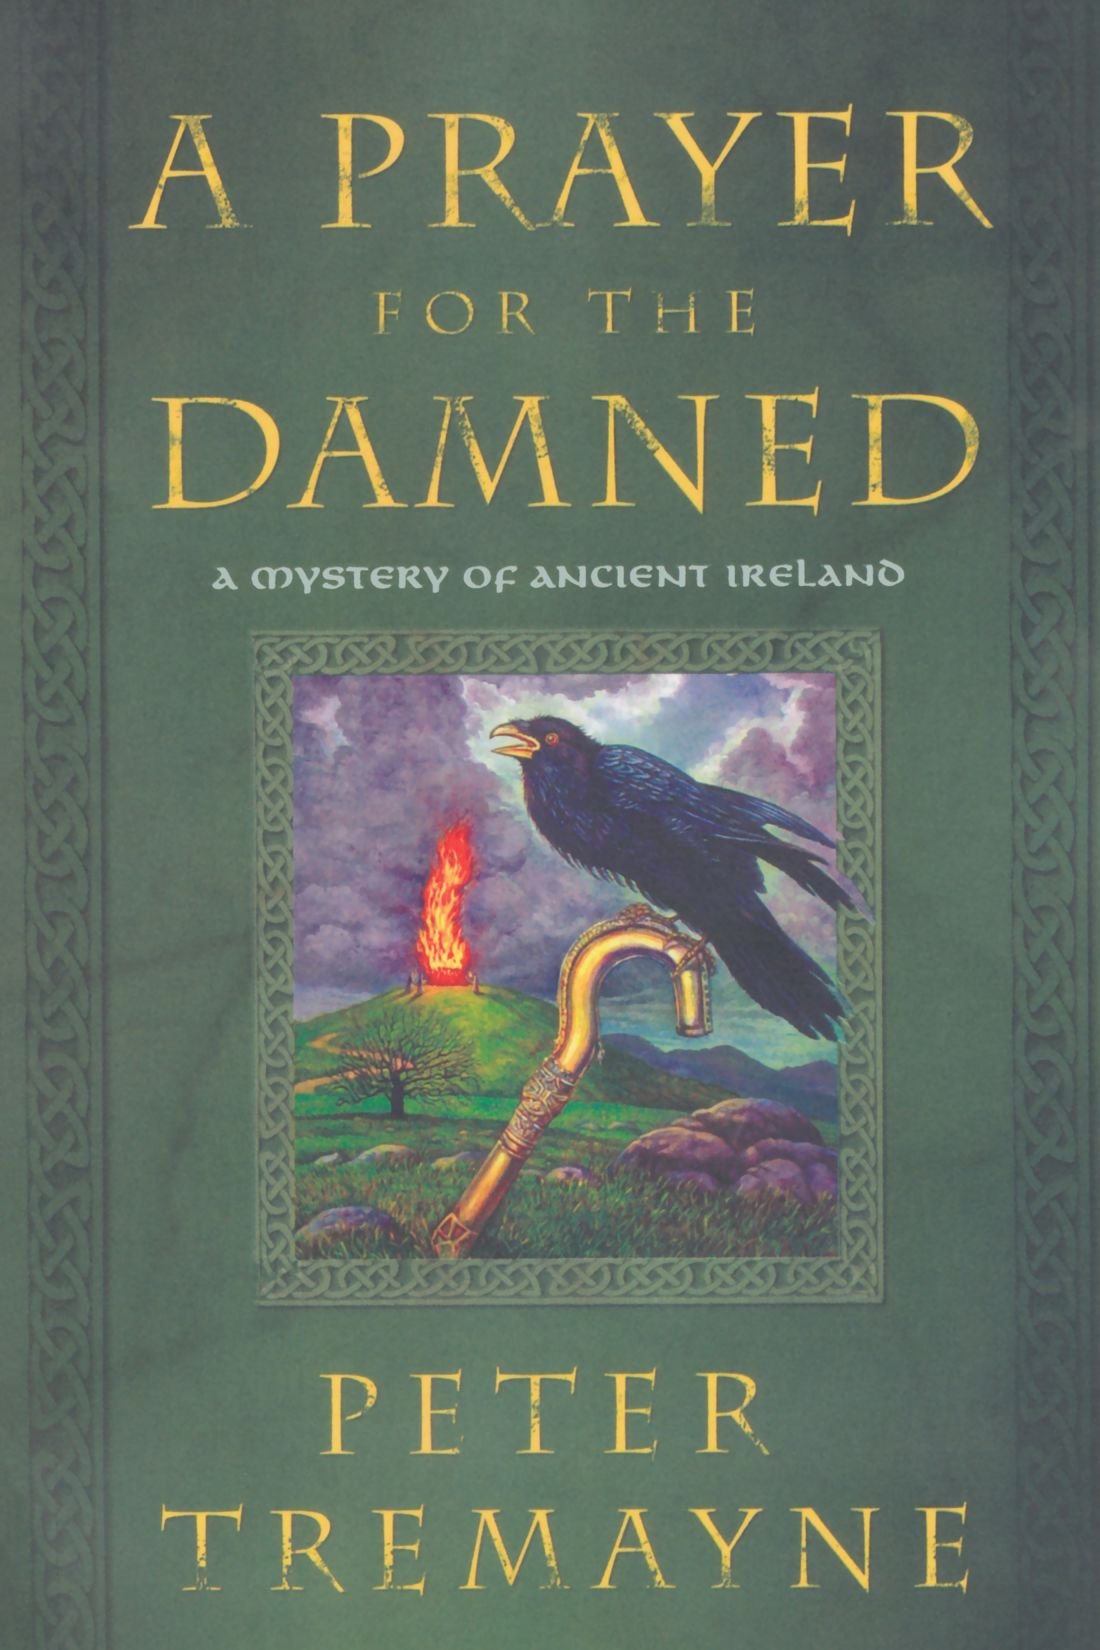 A Prayer for the Damned: A Mystery of Ancient Ireland